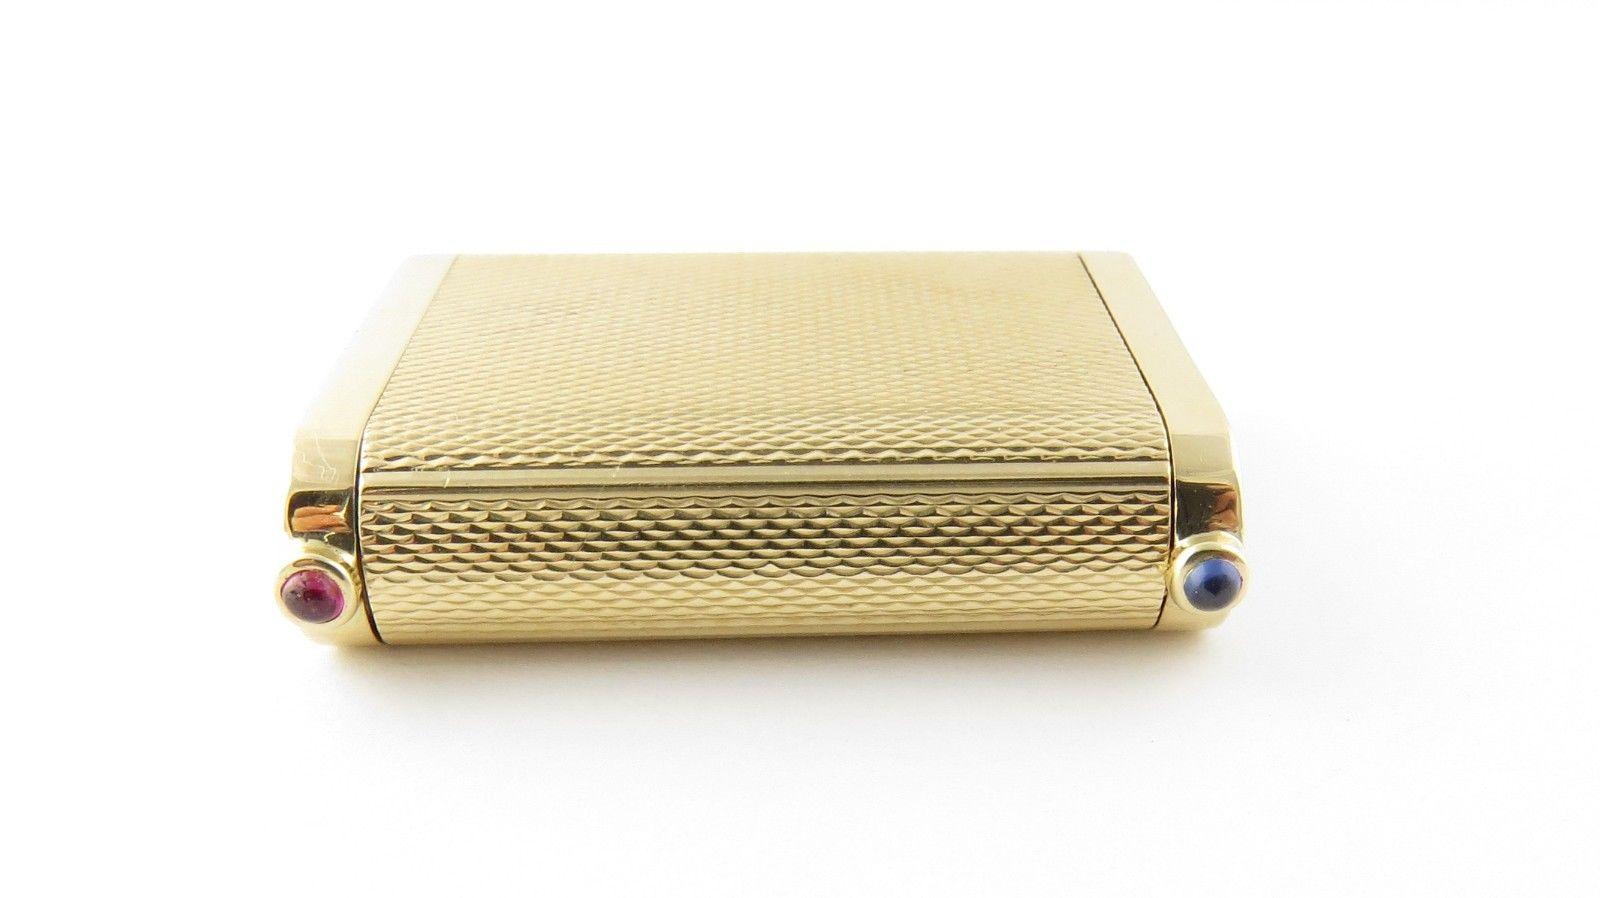 Vintage Cartier 14-karat yellow gold double pill box. This authentic Cartier pill box is approximate 35 mm x 28 mm x 9 mm. Each end opens for 2 separate compartments. One end has a bezel set cabochon blue sapphire - the other a cabochon red ruby.